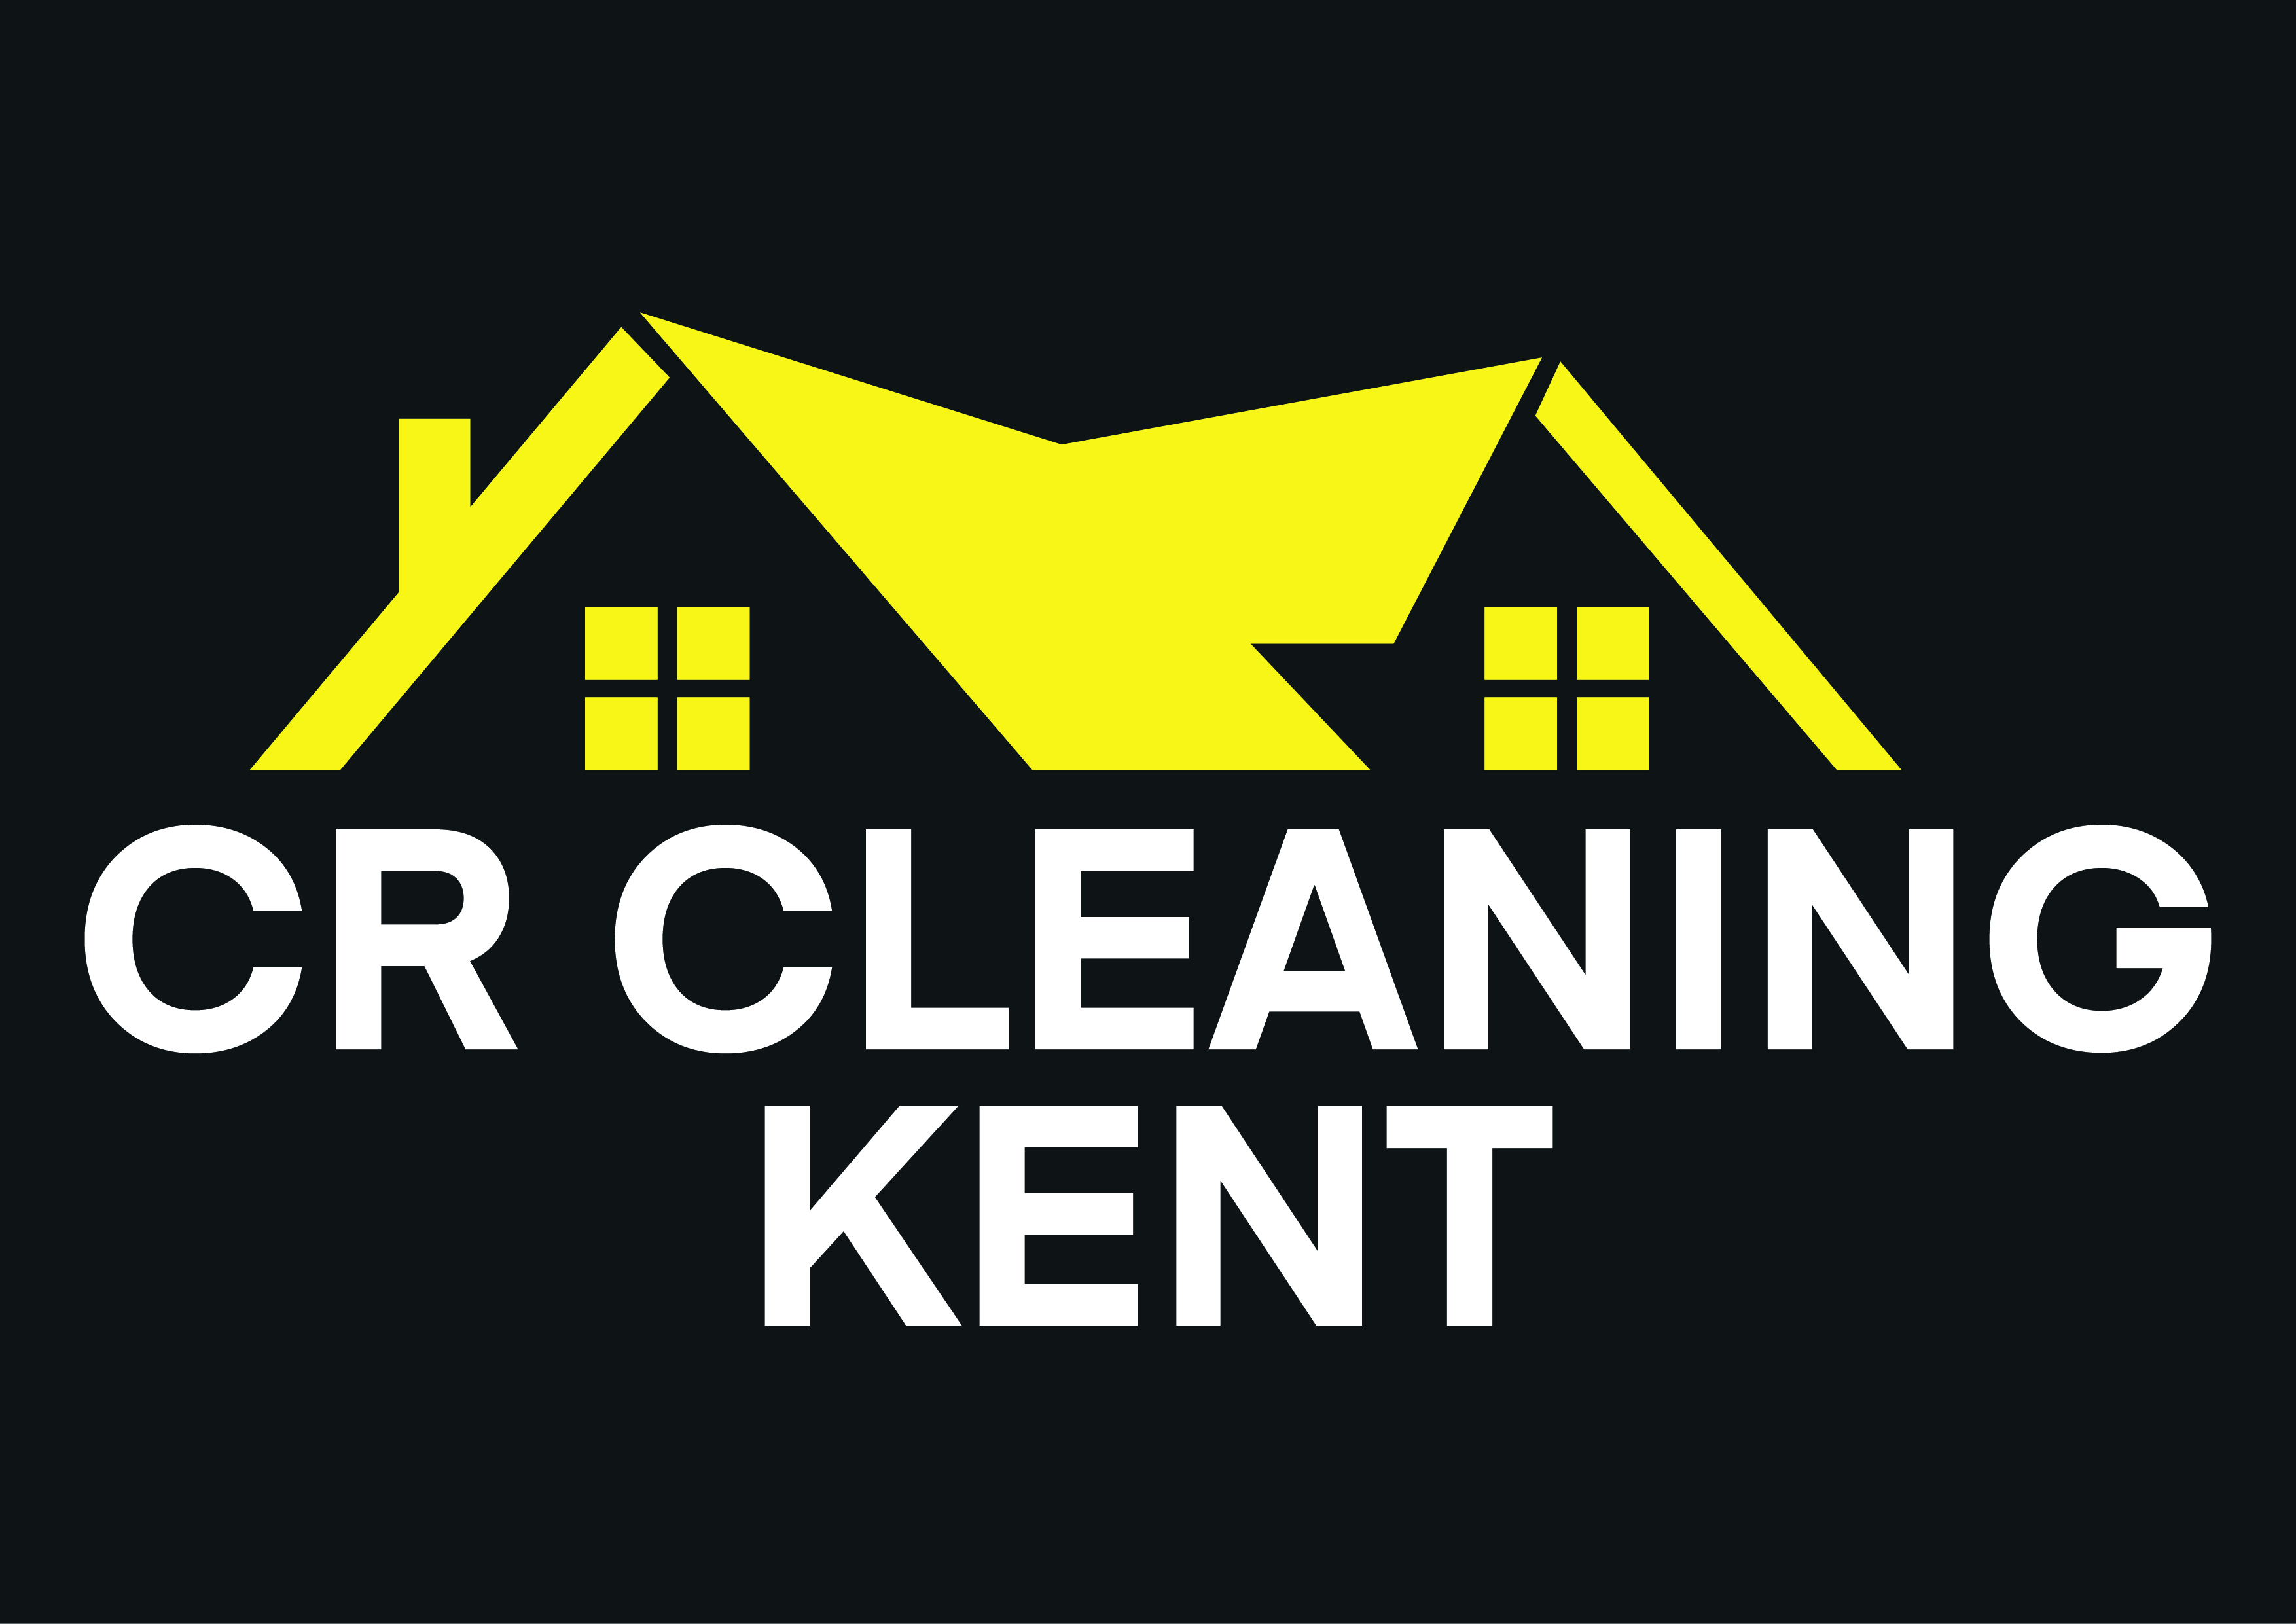 Logo of CR CLEANING KENT